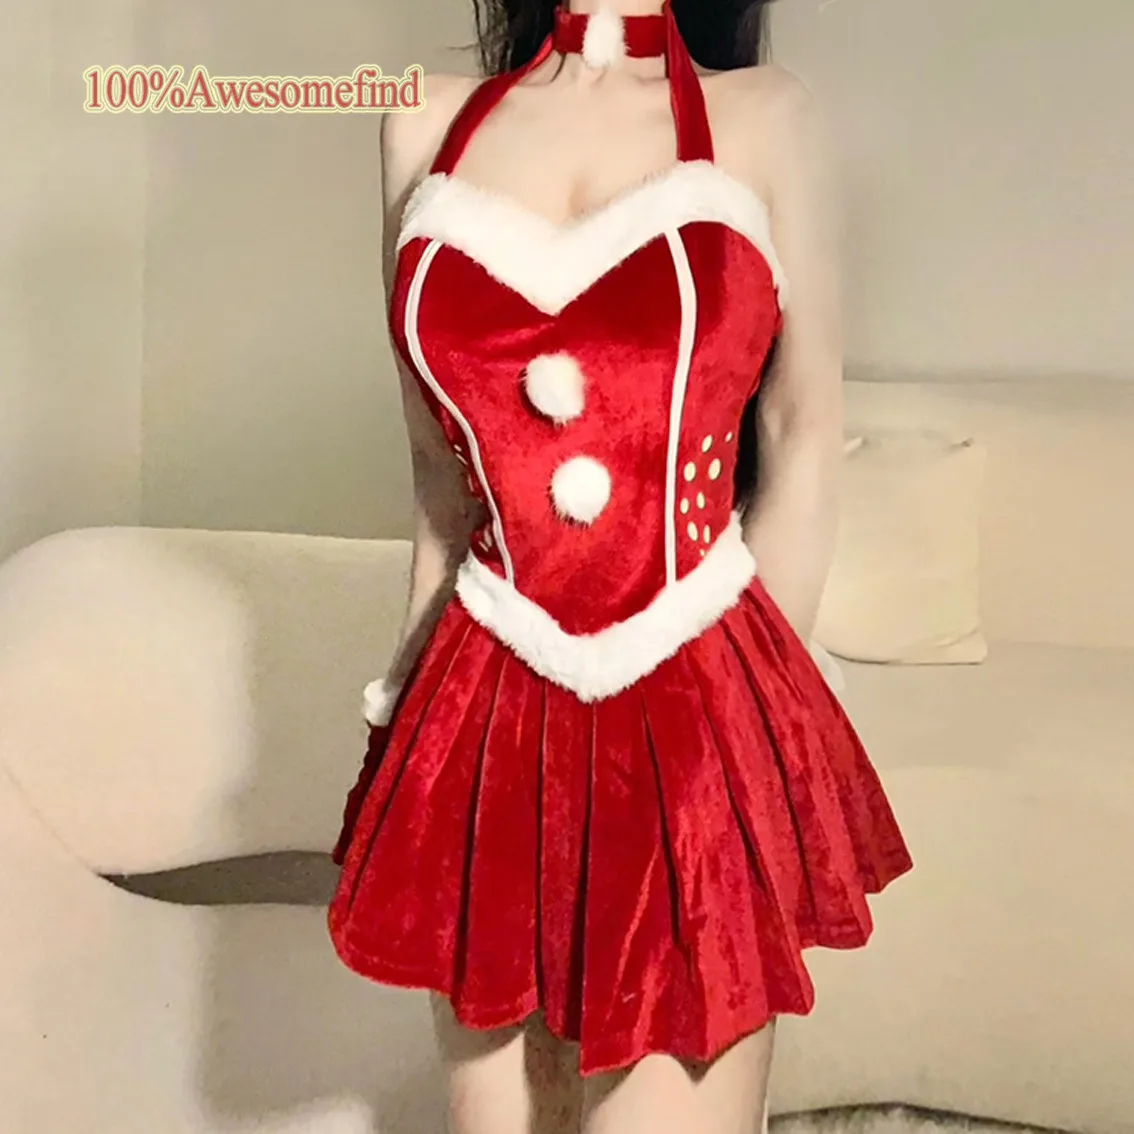 

2022 Women Christmas Party Xmas Lady Santa Claus Erotic Cosplay Costume Sexy Lingeries Exotic Winter Halter Dress Bunny Girl